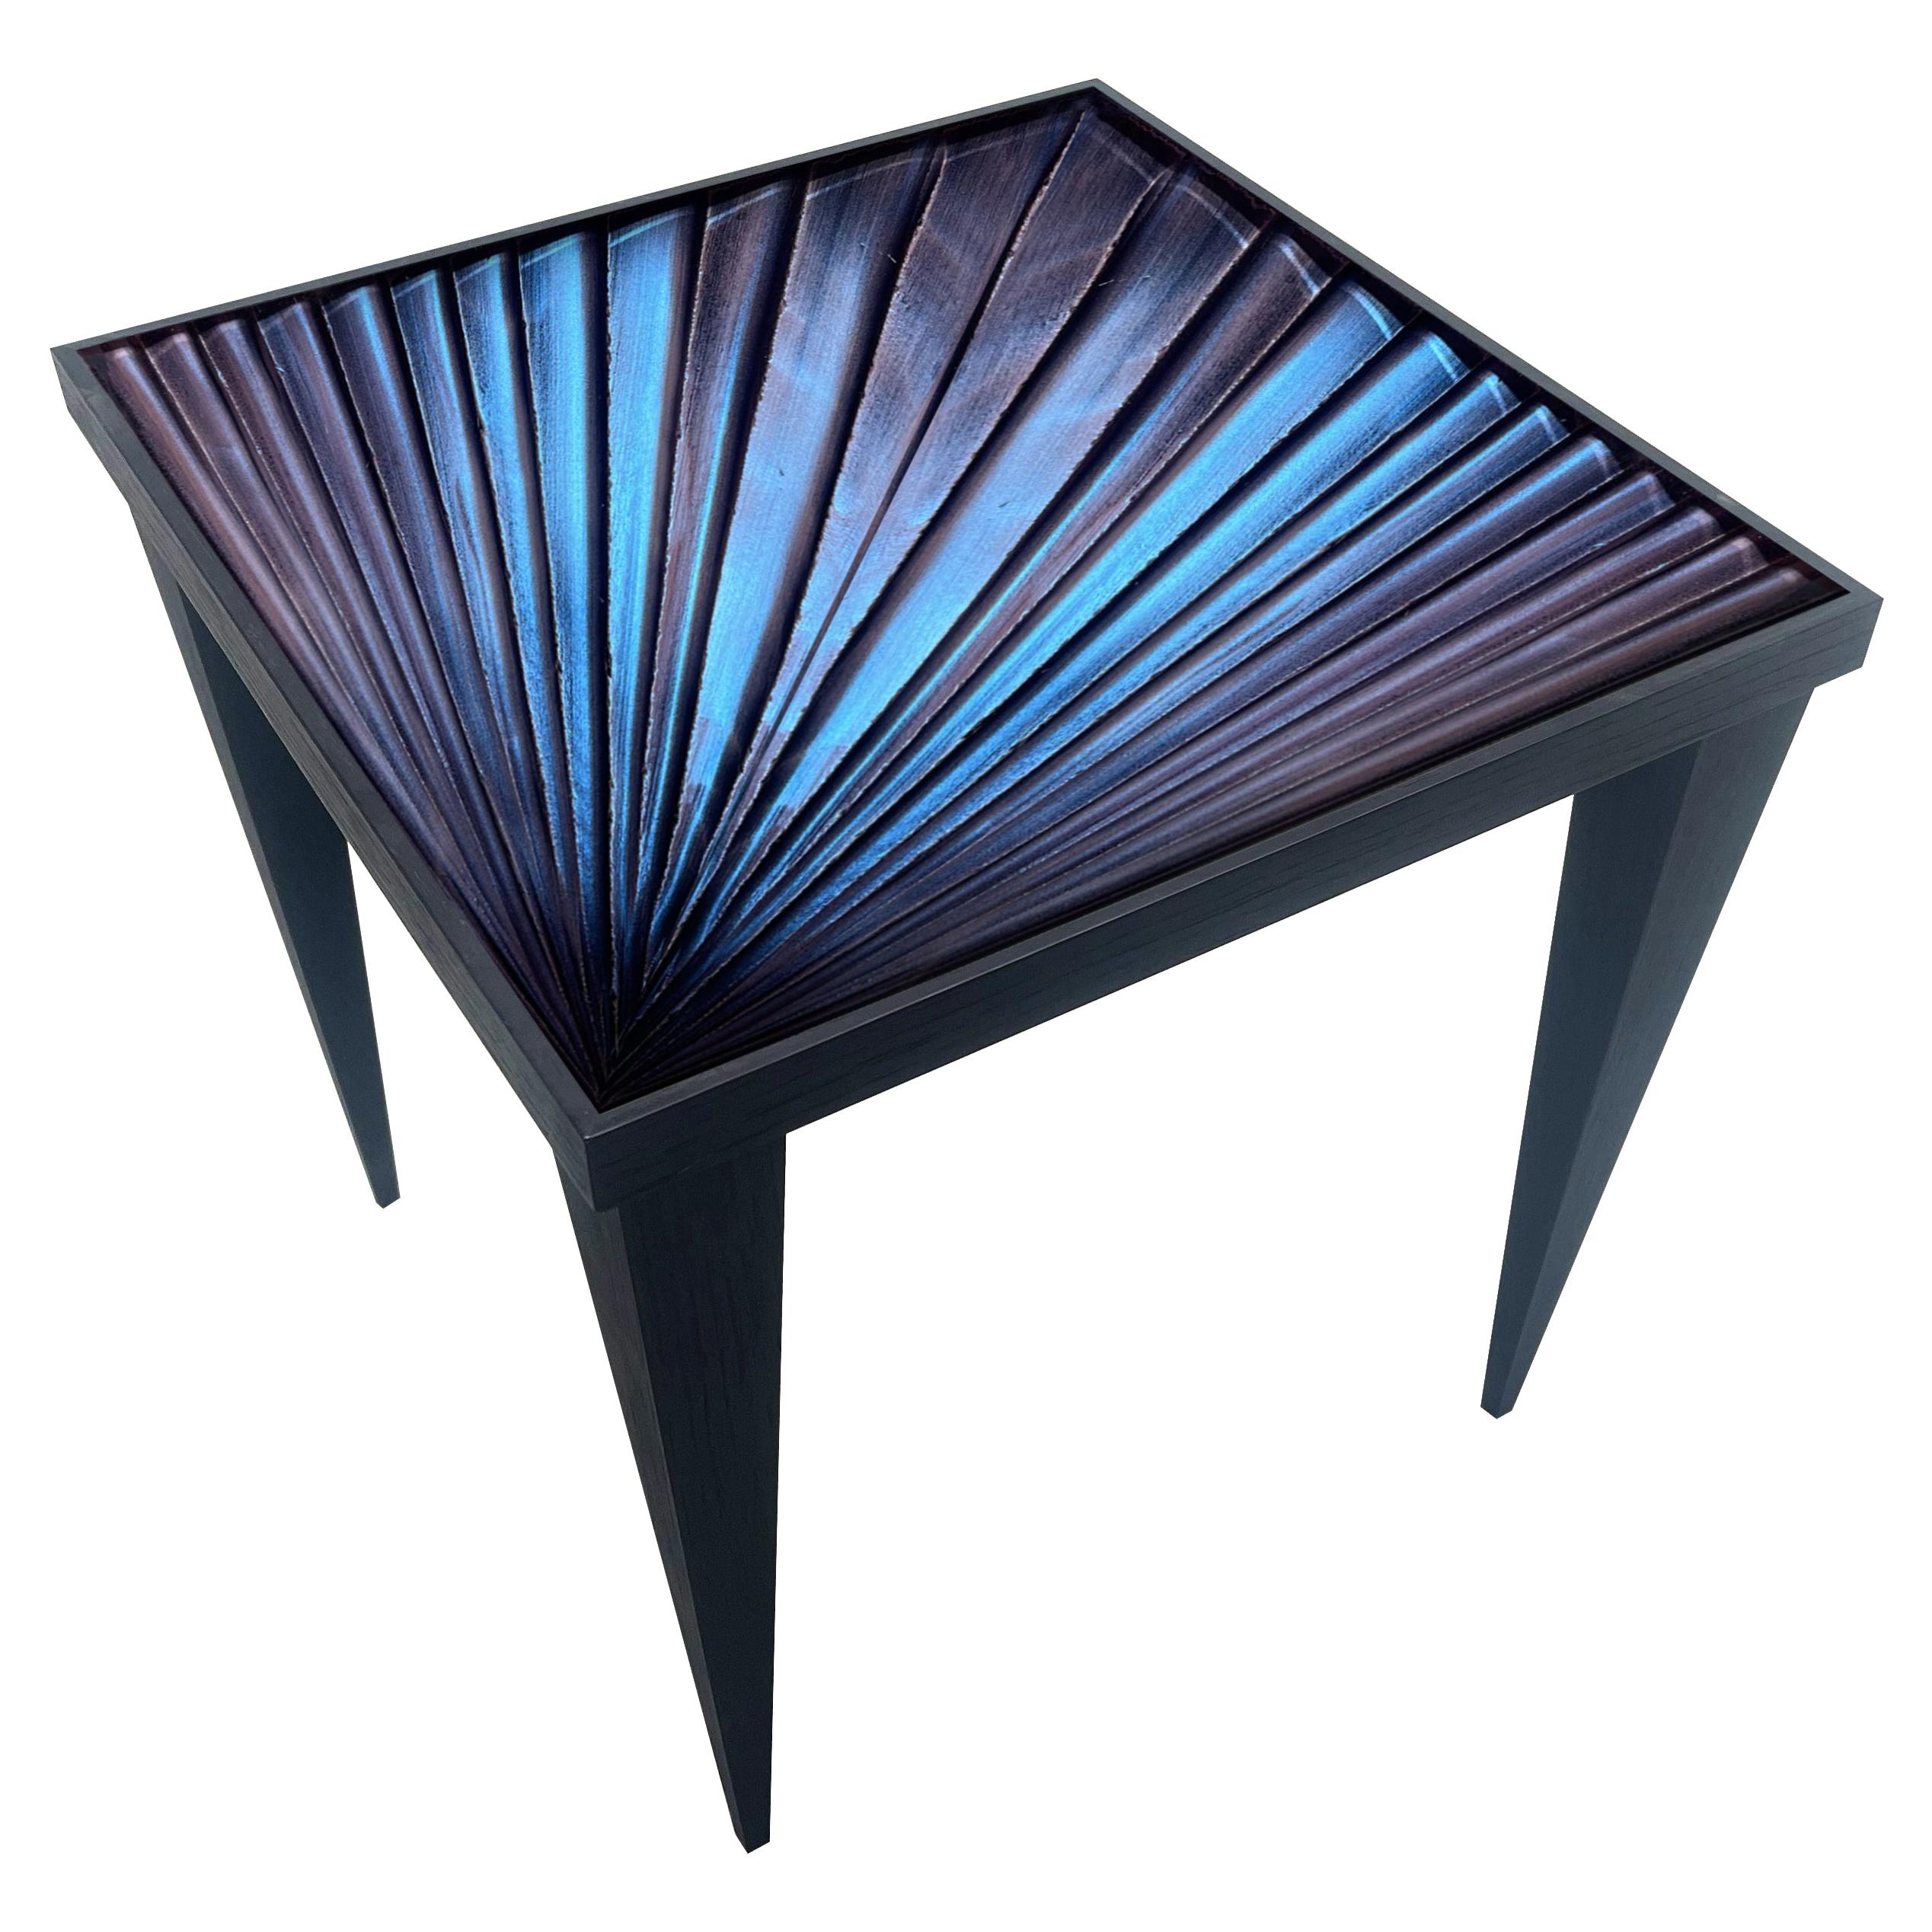 Contemporary ‘Square’ Table Blue Crystal and Oak Wood Handmade by Ghirò Studio For Sale